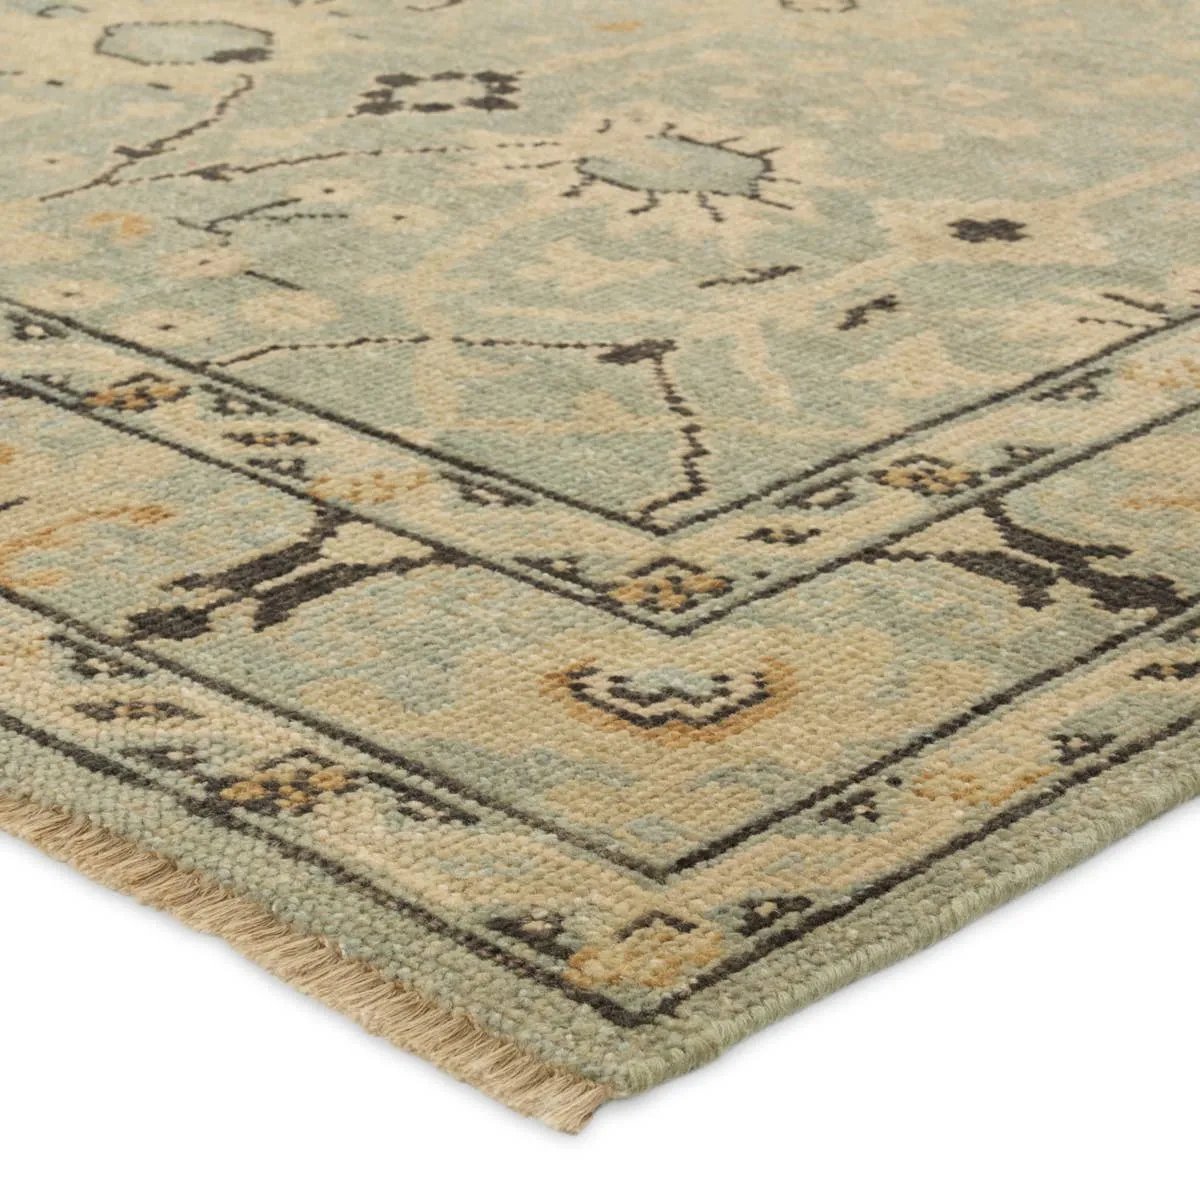 The Rhapsody Markid features heirloom-quality designs of stunningly abrashed Old World patterns. The Markid area rug boasts a beautifully distressed floral and Oushak motif with a decorative border. The light blue and tan tones are accented with black and beige hues for added depth and intrigue. Amethyst Home provides interior design, new home construction design consulting, vintage area rugs, and lighting in the Scottsdale metro area.